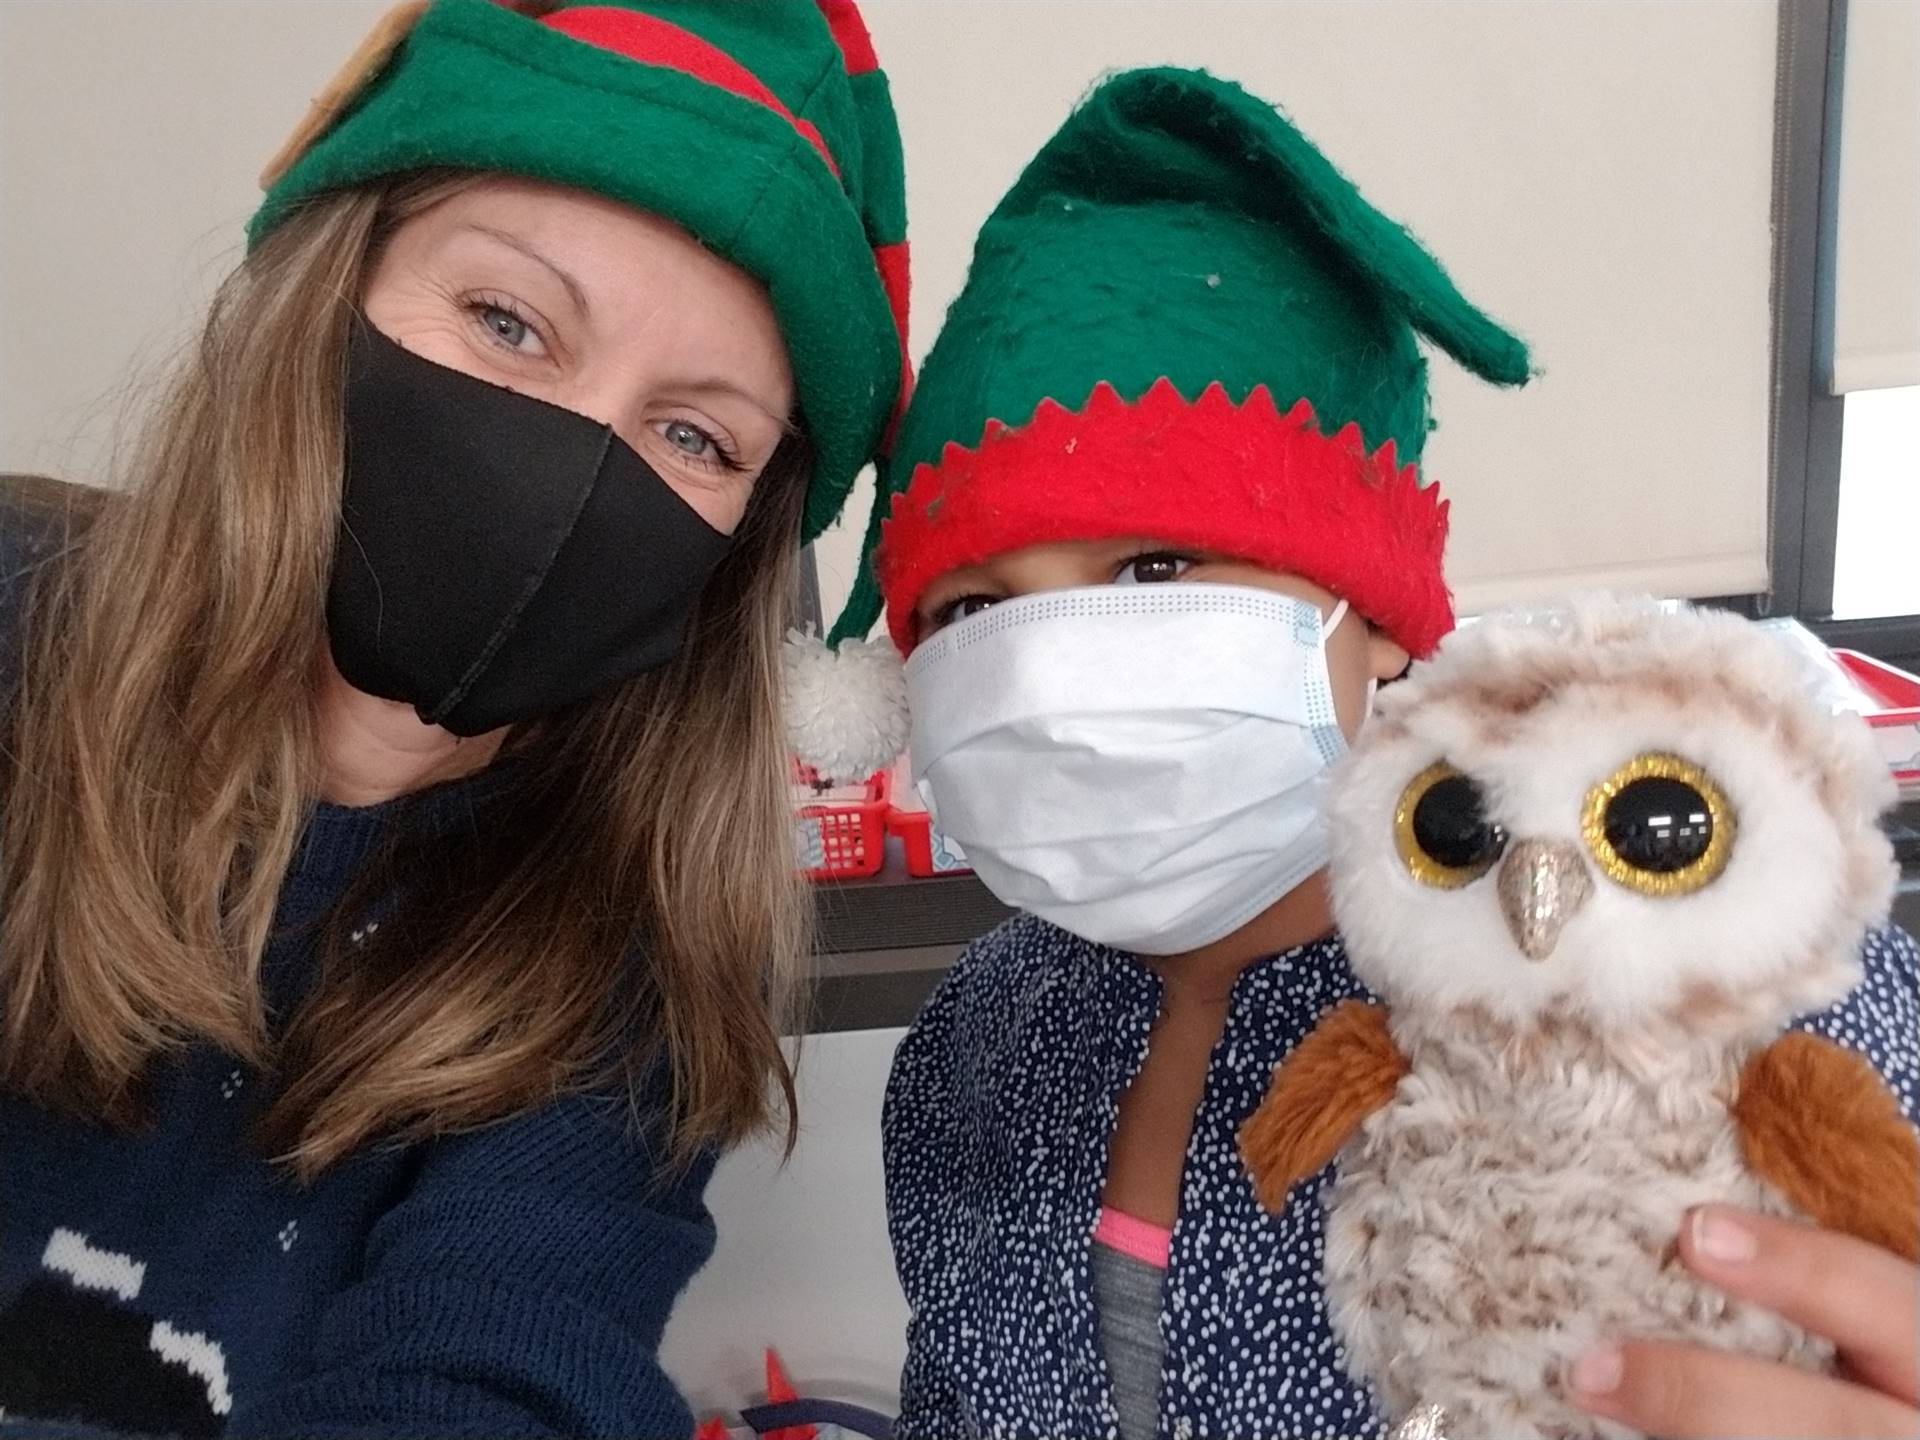 a teacher and student with elf hats on and student holding a stuffed owl.